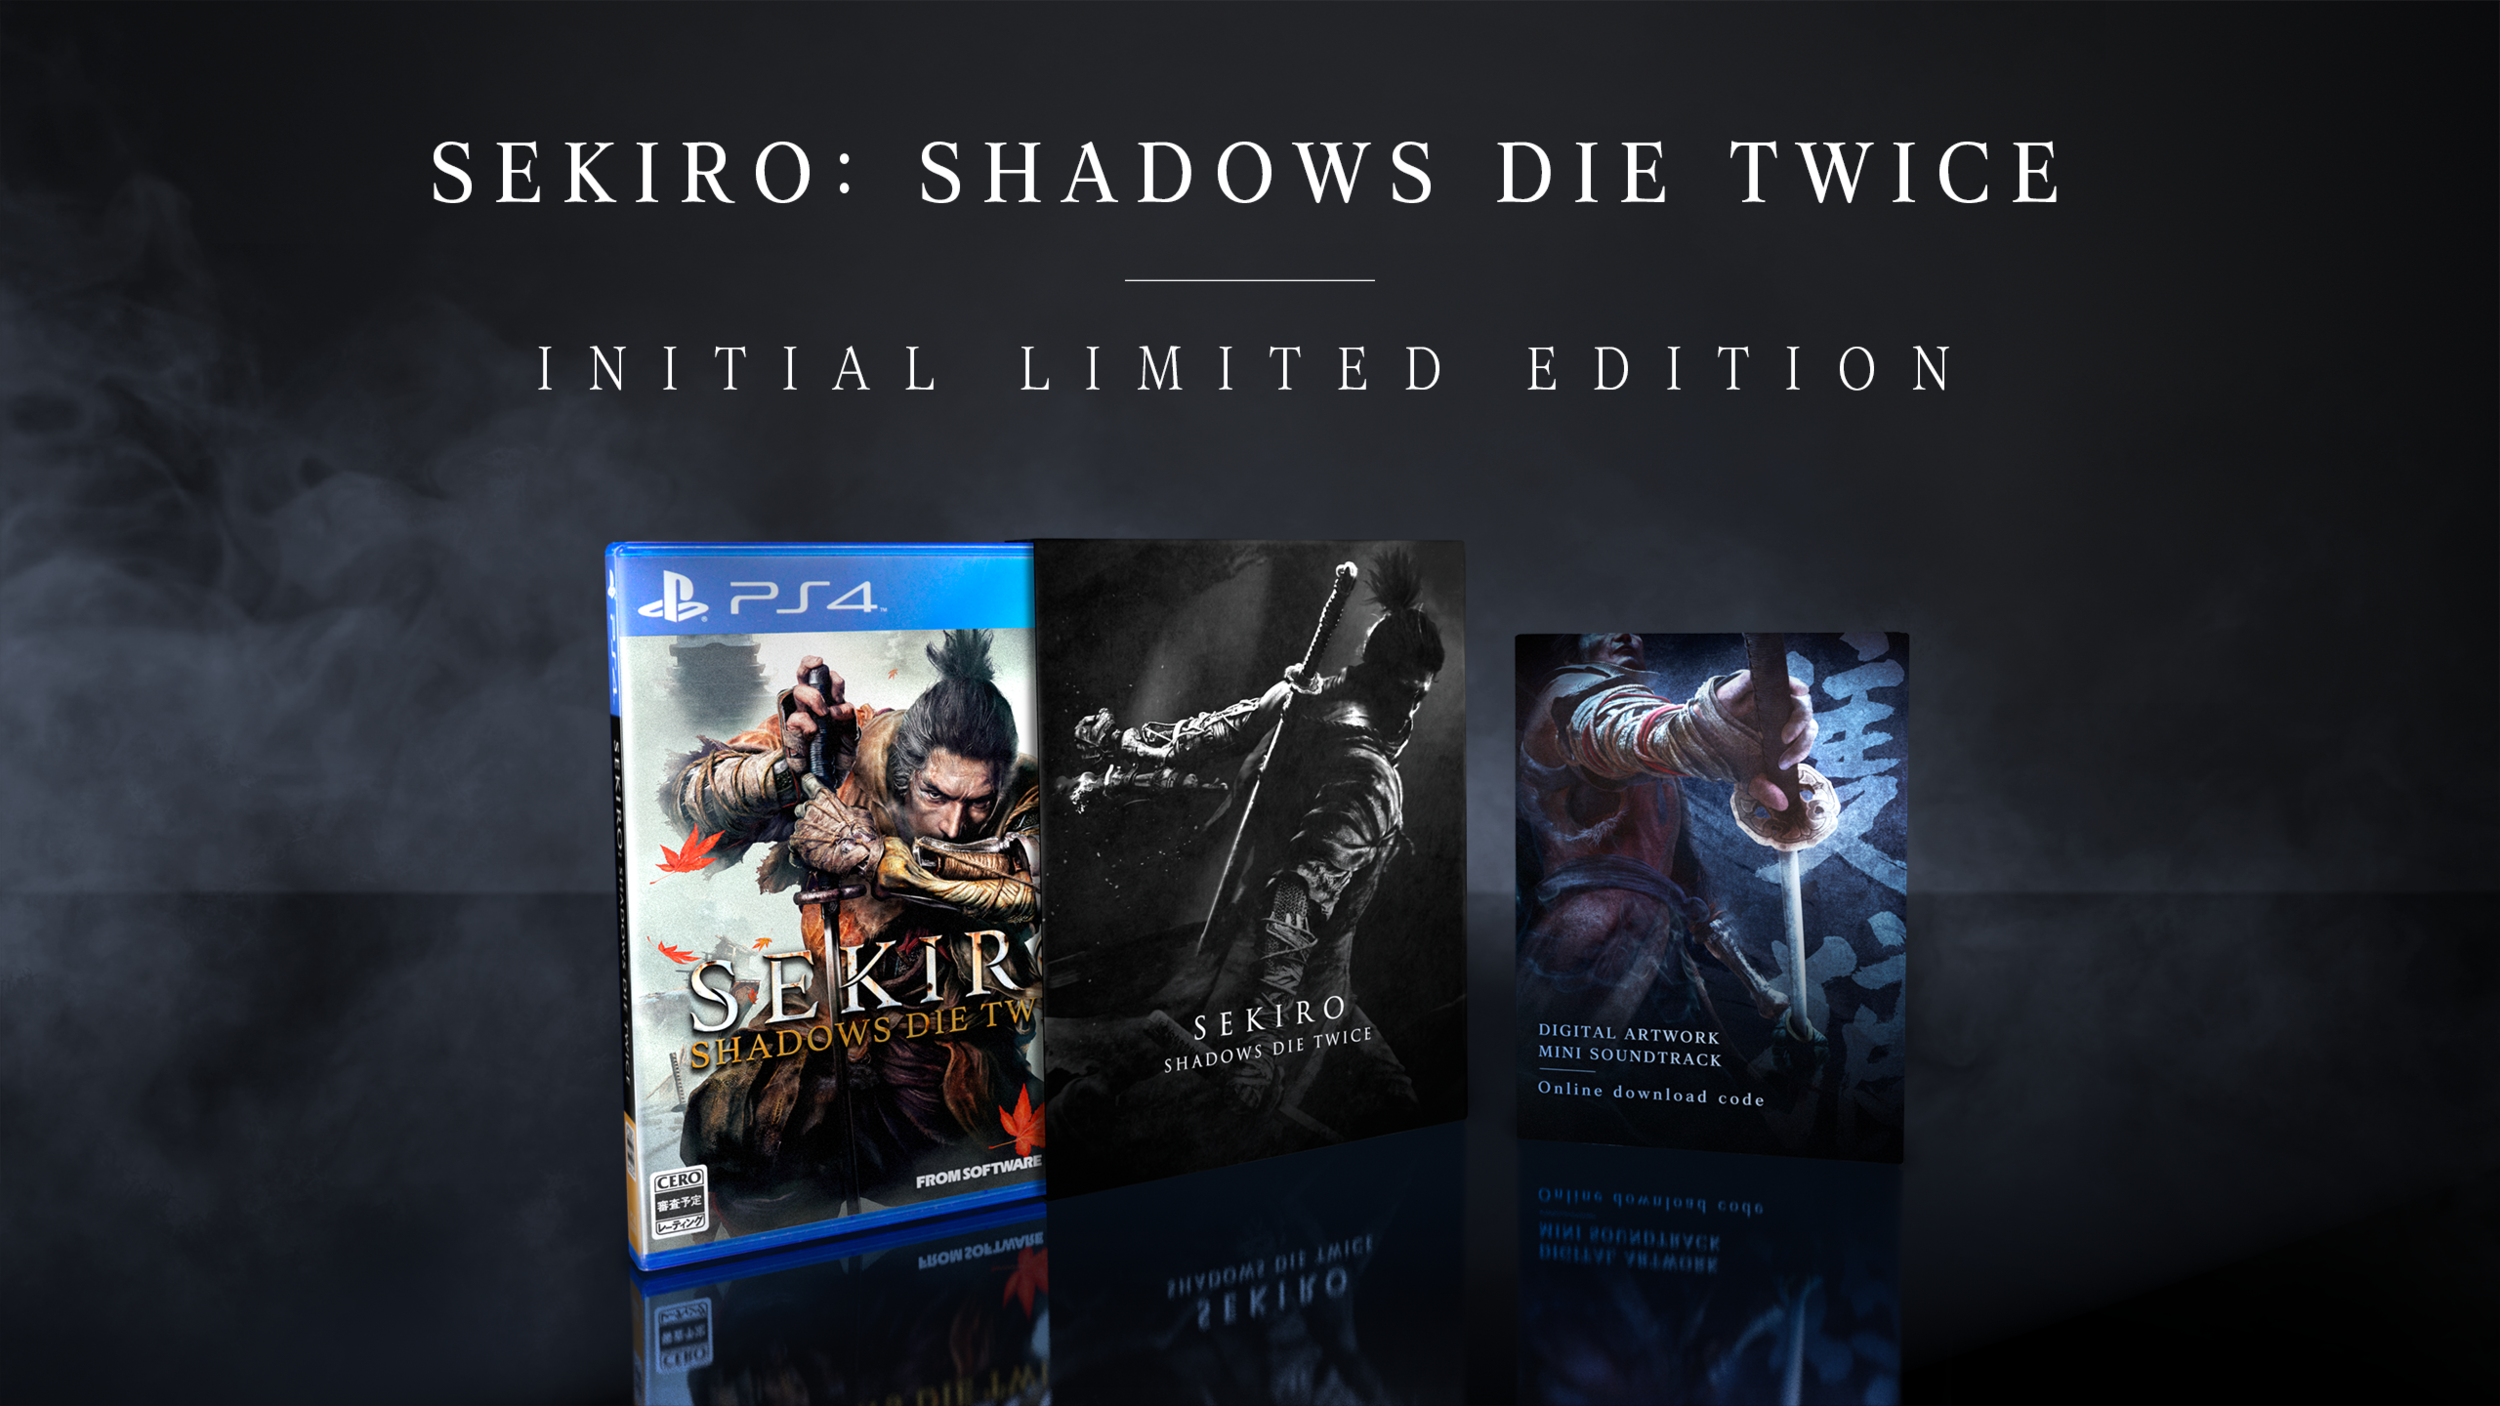 Sekiro: Shadows Die Twice Collector's Comes A Statue — Too Much | Video Games Reviews, News, & Guides